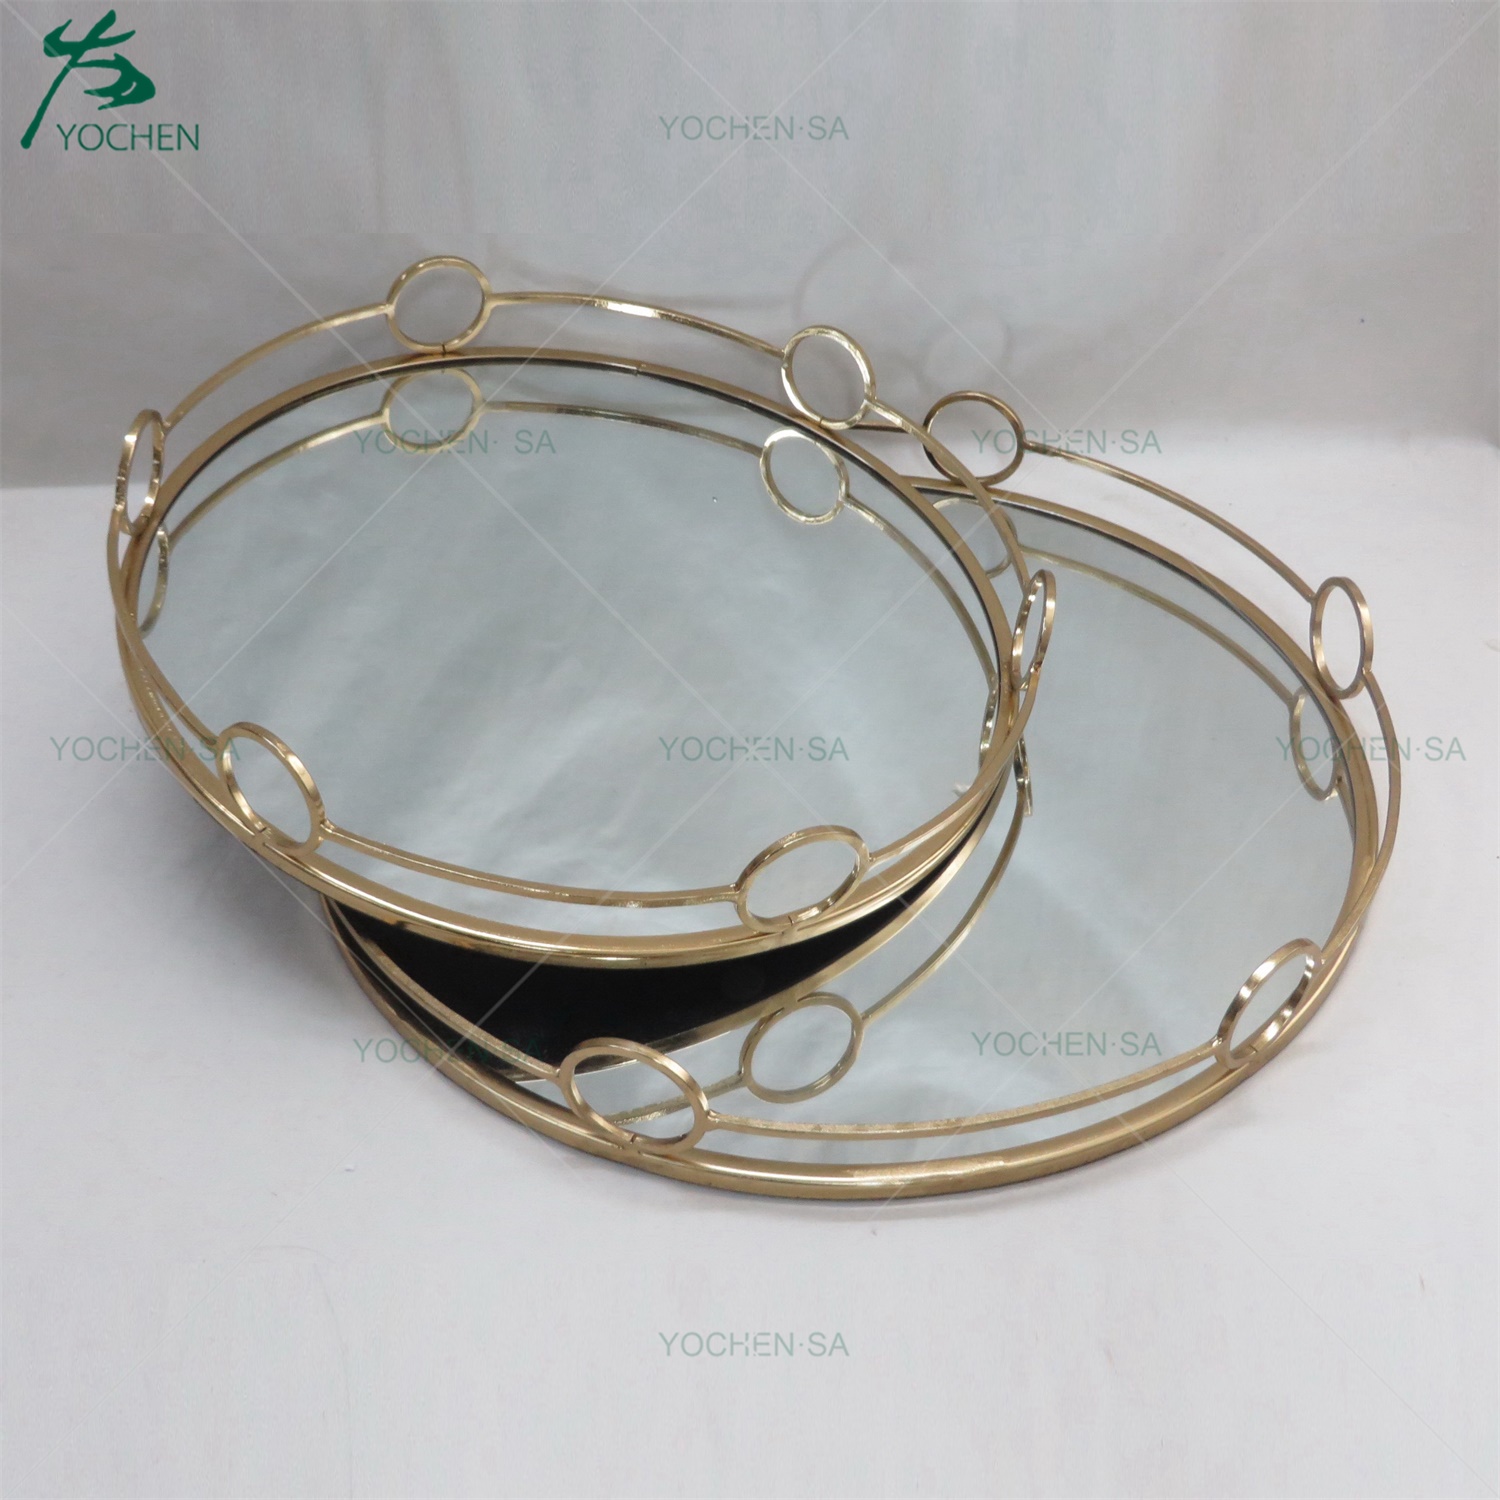 Silver Metal Storage Tray for Wedding Decors